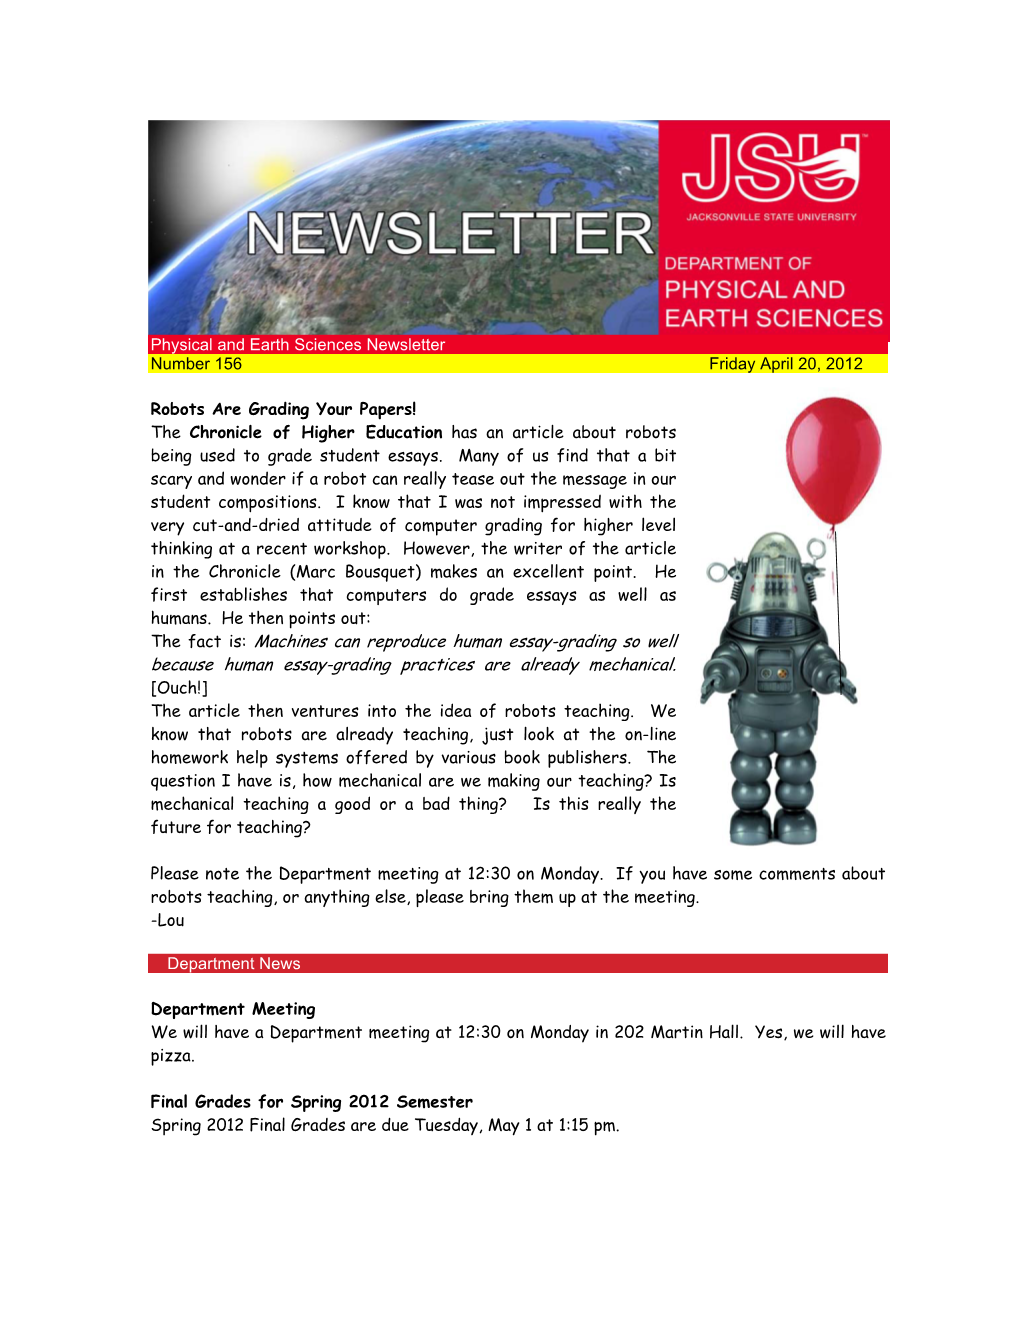 Physical and Earth Sciences Newsletter Number 156 Friday April 20, 2012 Robots Are Grading Your Papers! the Chronicle of Higher